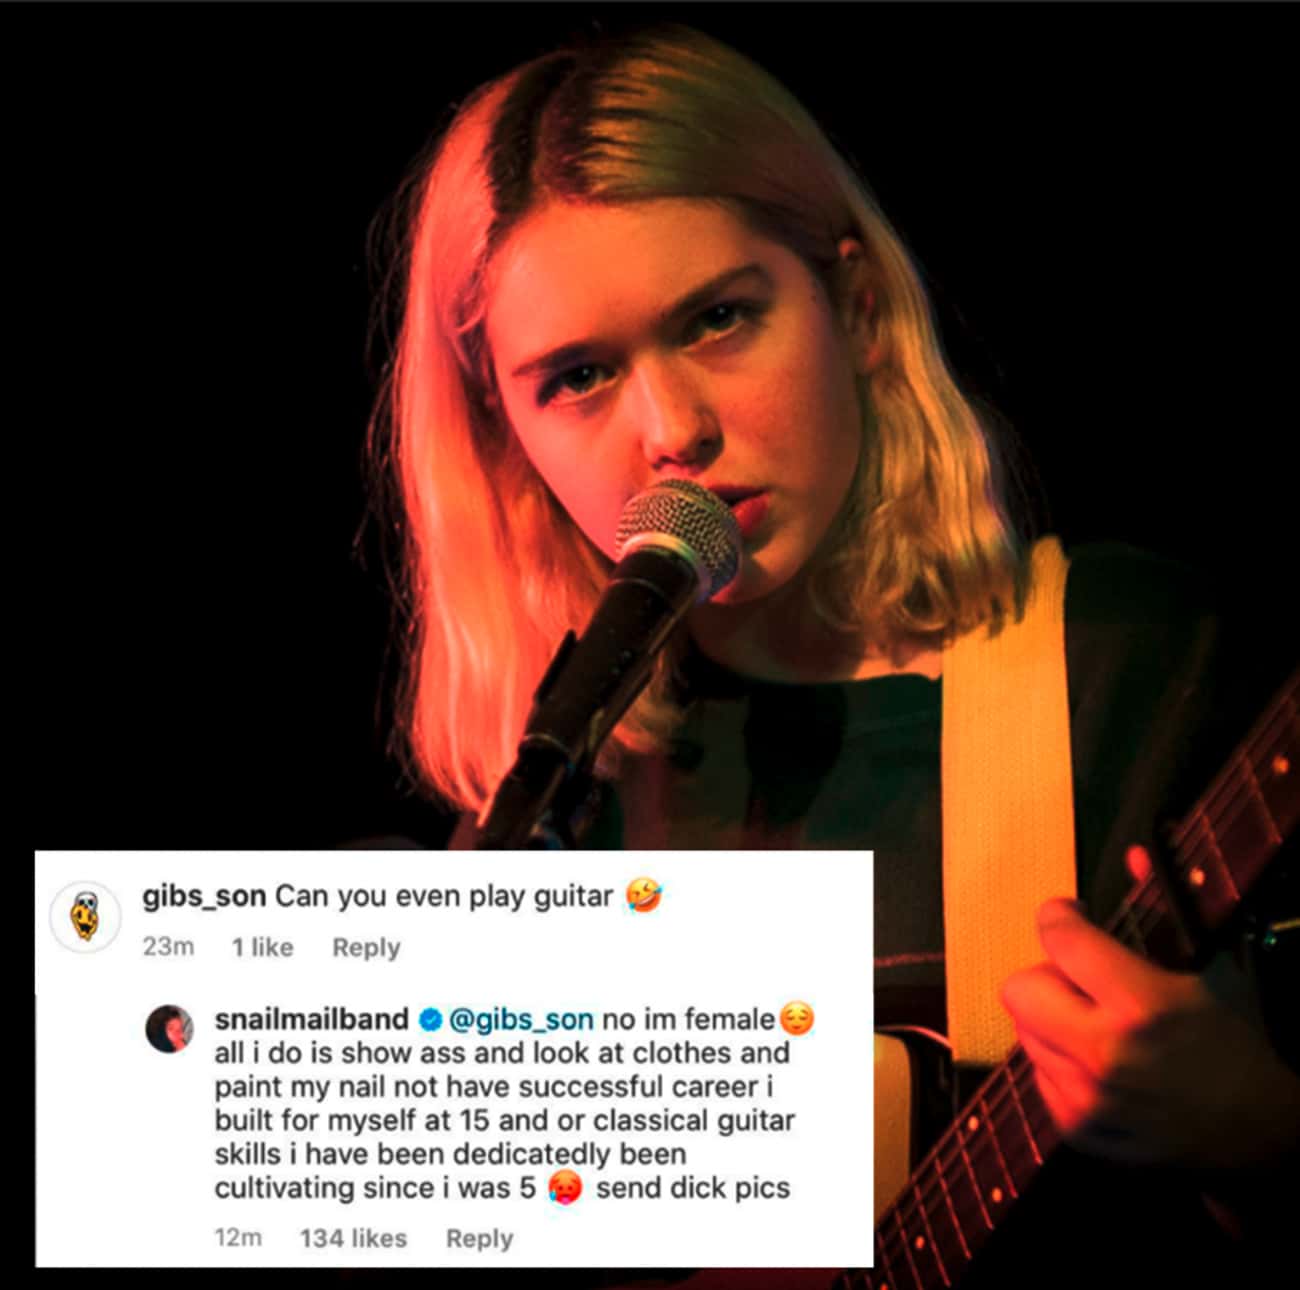 celebs savage replies - snail mail - gibs_son Can you even play guitar 23m 1 snailmailband no im female all i do is show ass and look at clothes and paint my nail not have successful career i built for myself at 15 and or classical guitar skills i have be